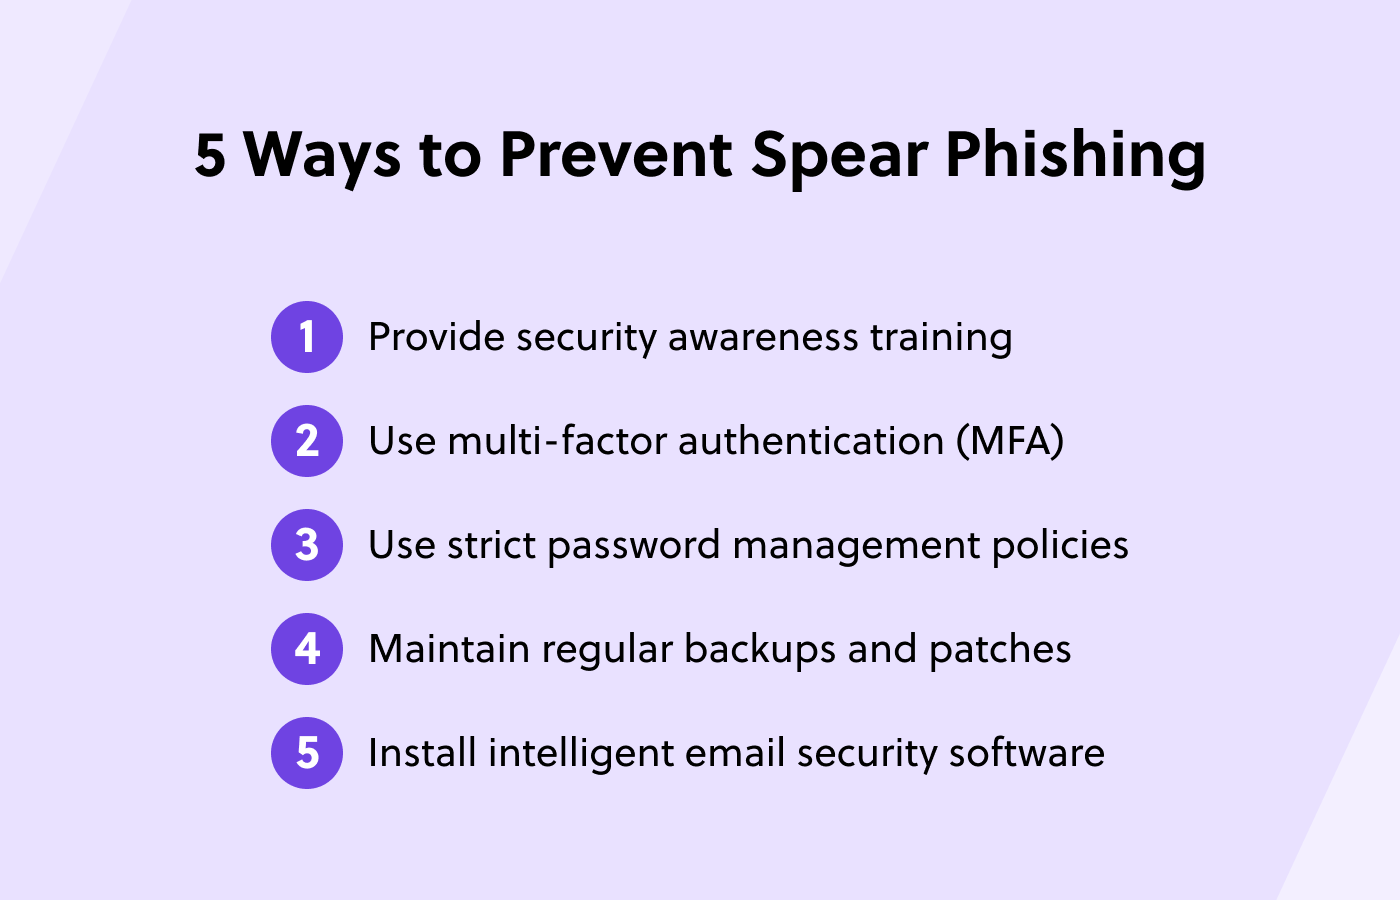 Graphic showing 5 ways to prevent spear phishing